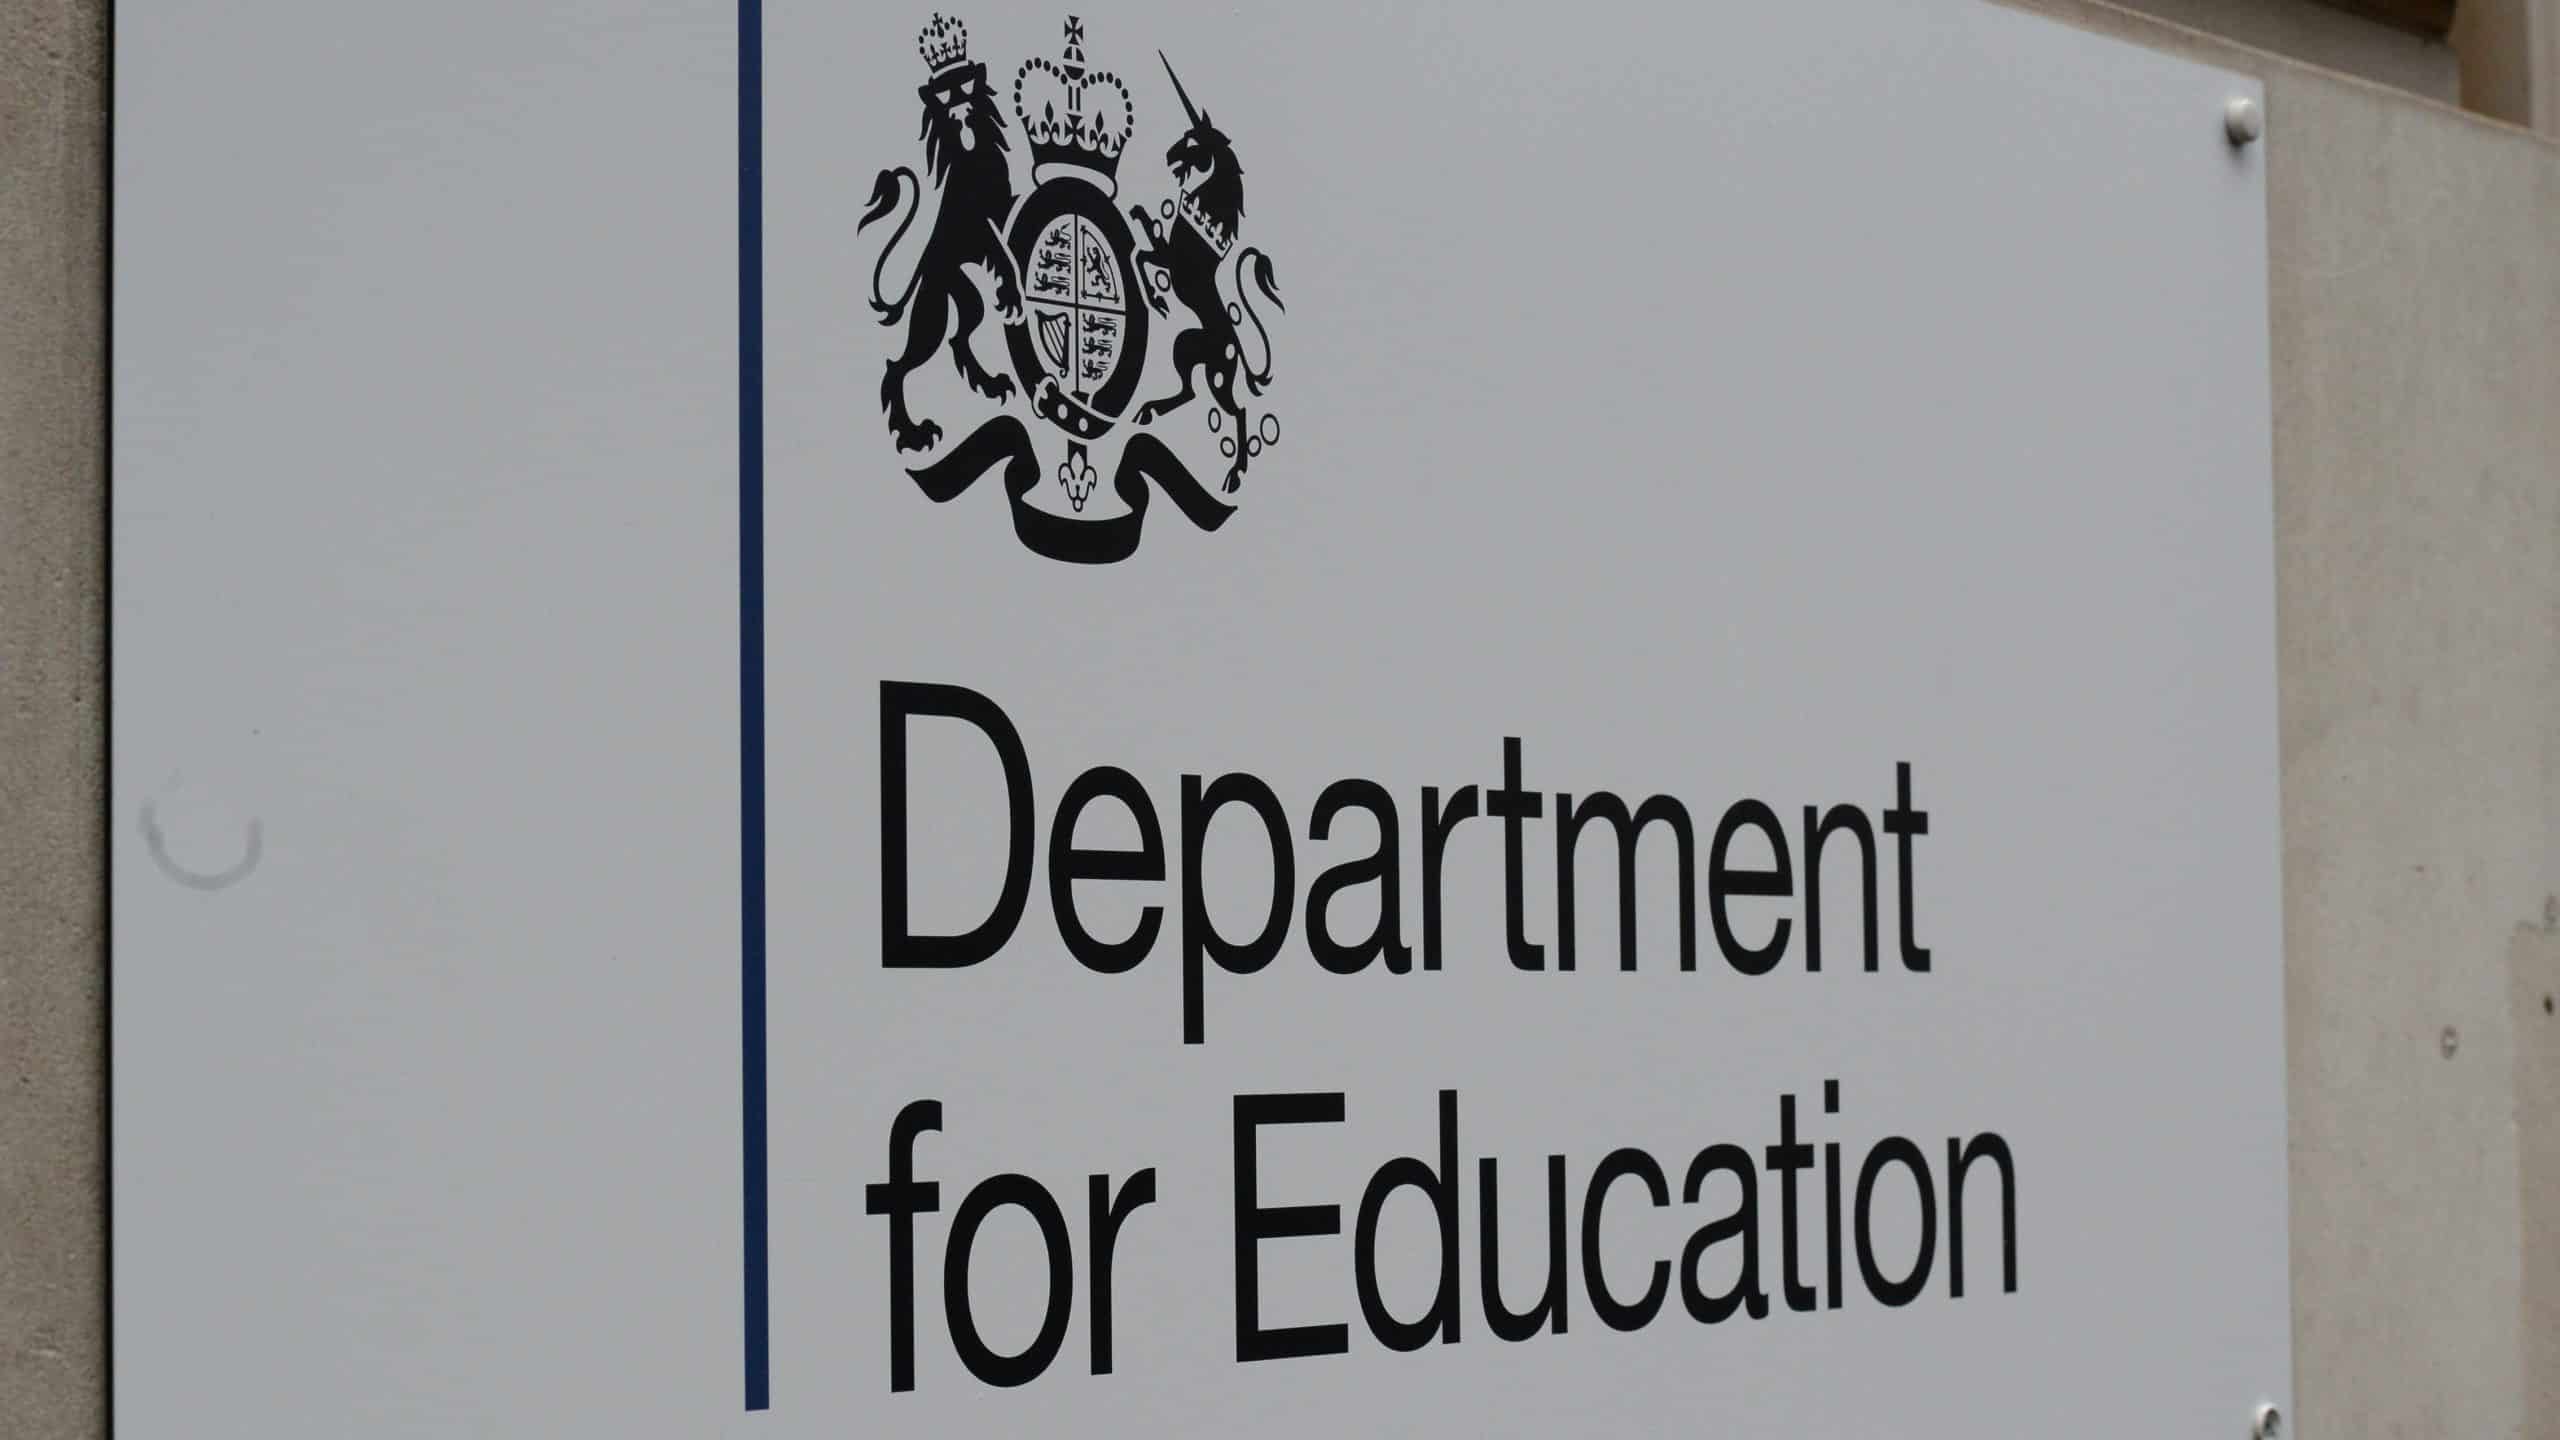 More than £1m spent on private hire cars by Department for Education